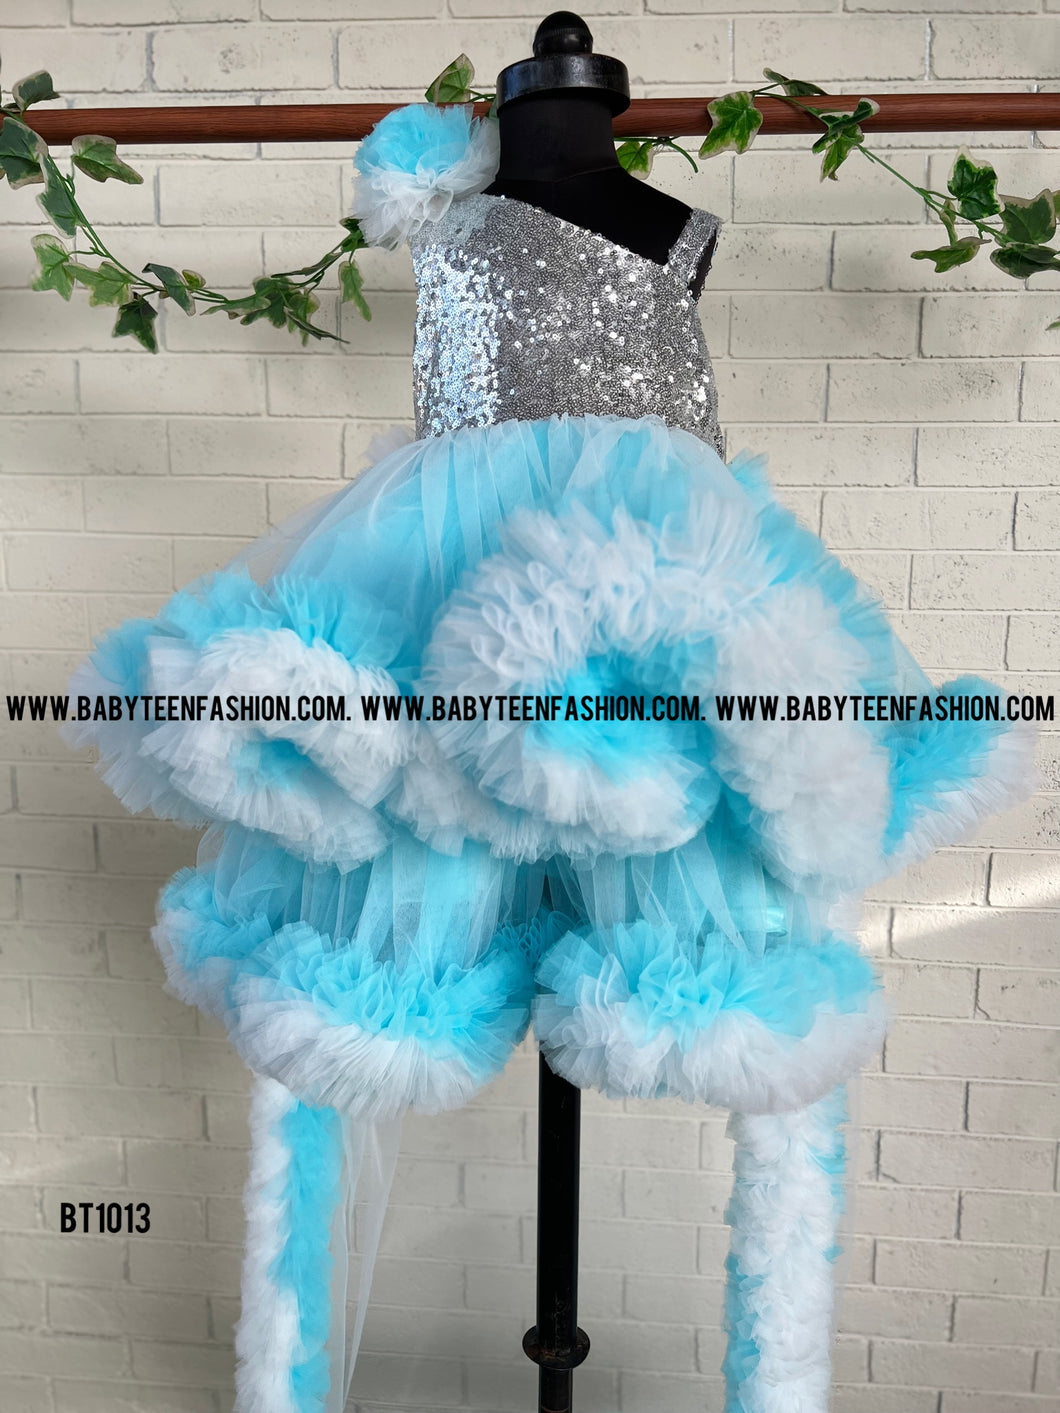 BT1013 Ice Queen Sparkle Gown - Let Her Shine Like Frozen Royalty